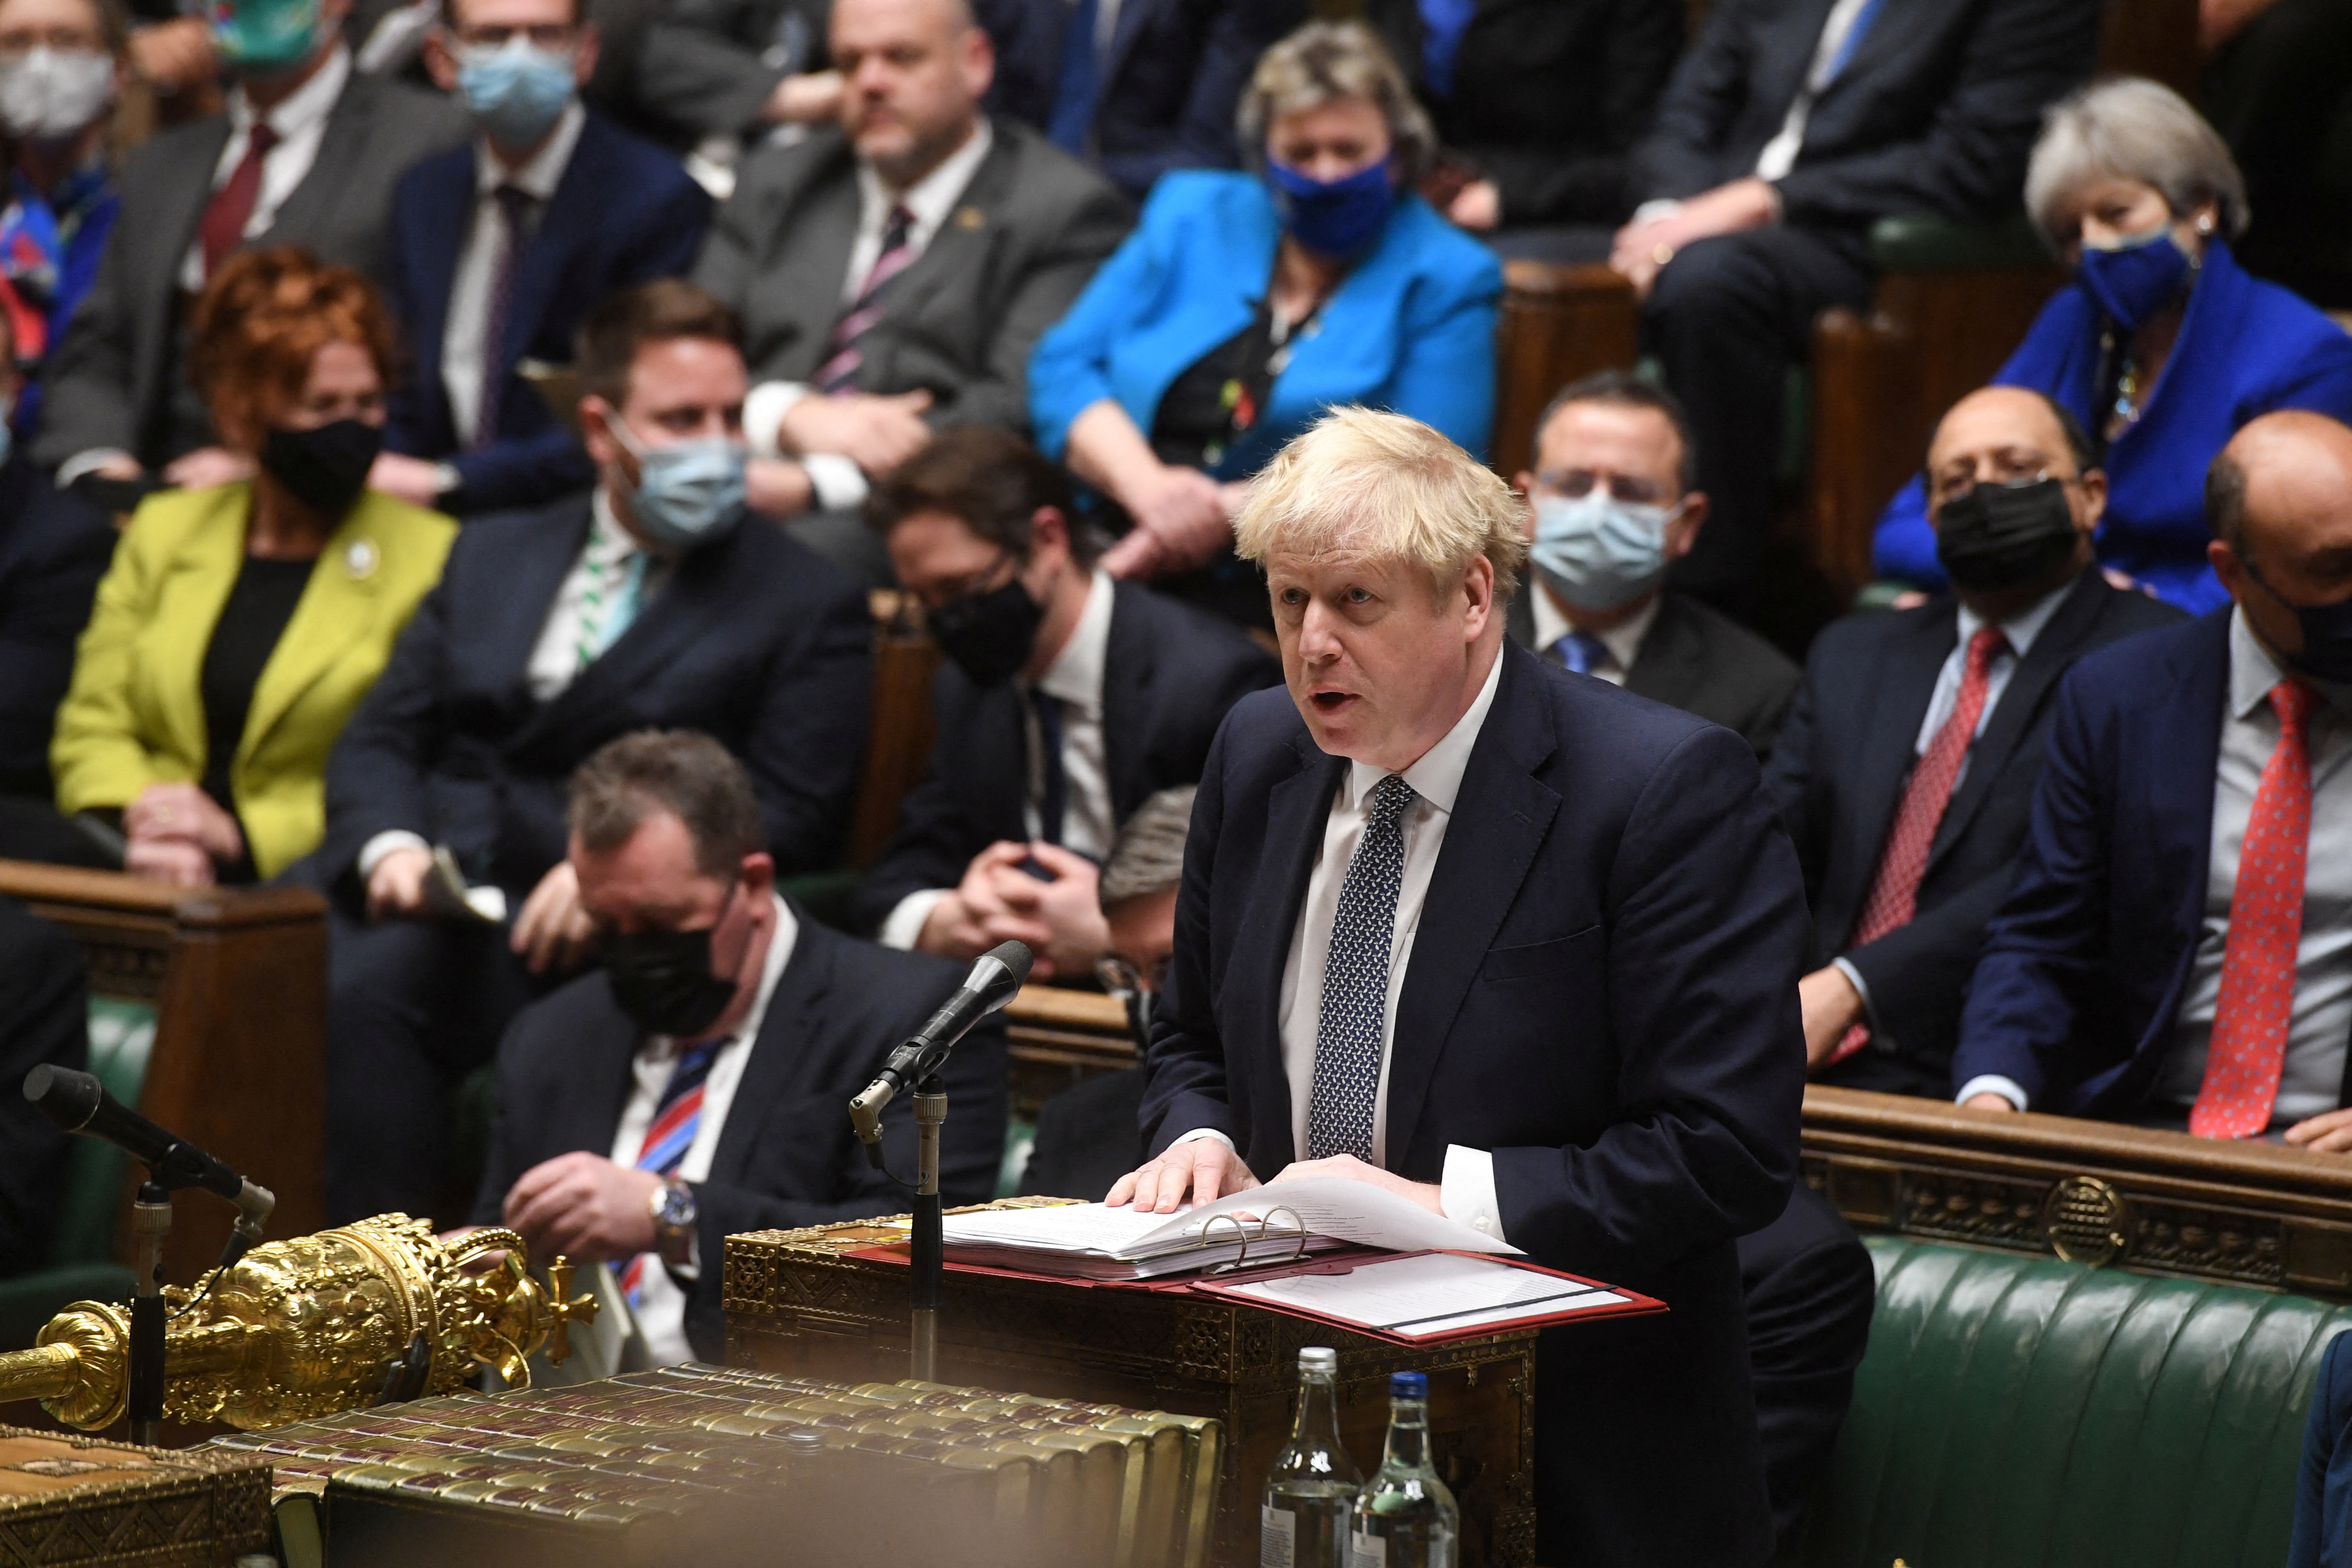 British Prime Minister Boris Johnson attends the weekly Prime Minister's Questions at the parliament in London, Britain, January 12, 2022. UK Parliament/Jessica Taylor/Handout via REUTERS